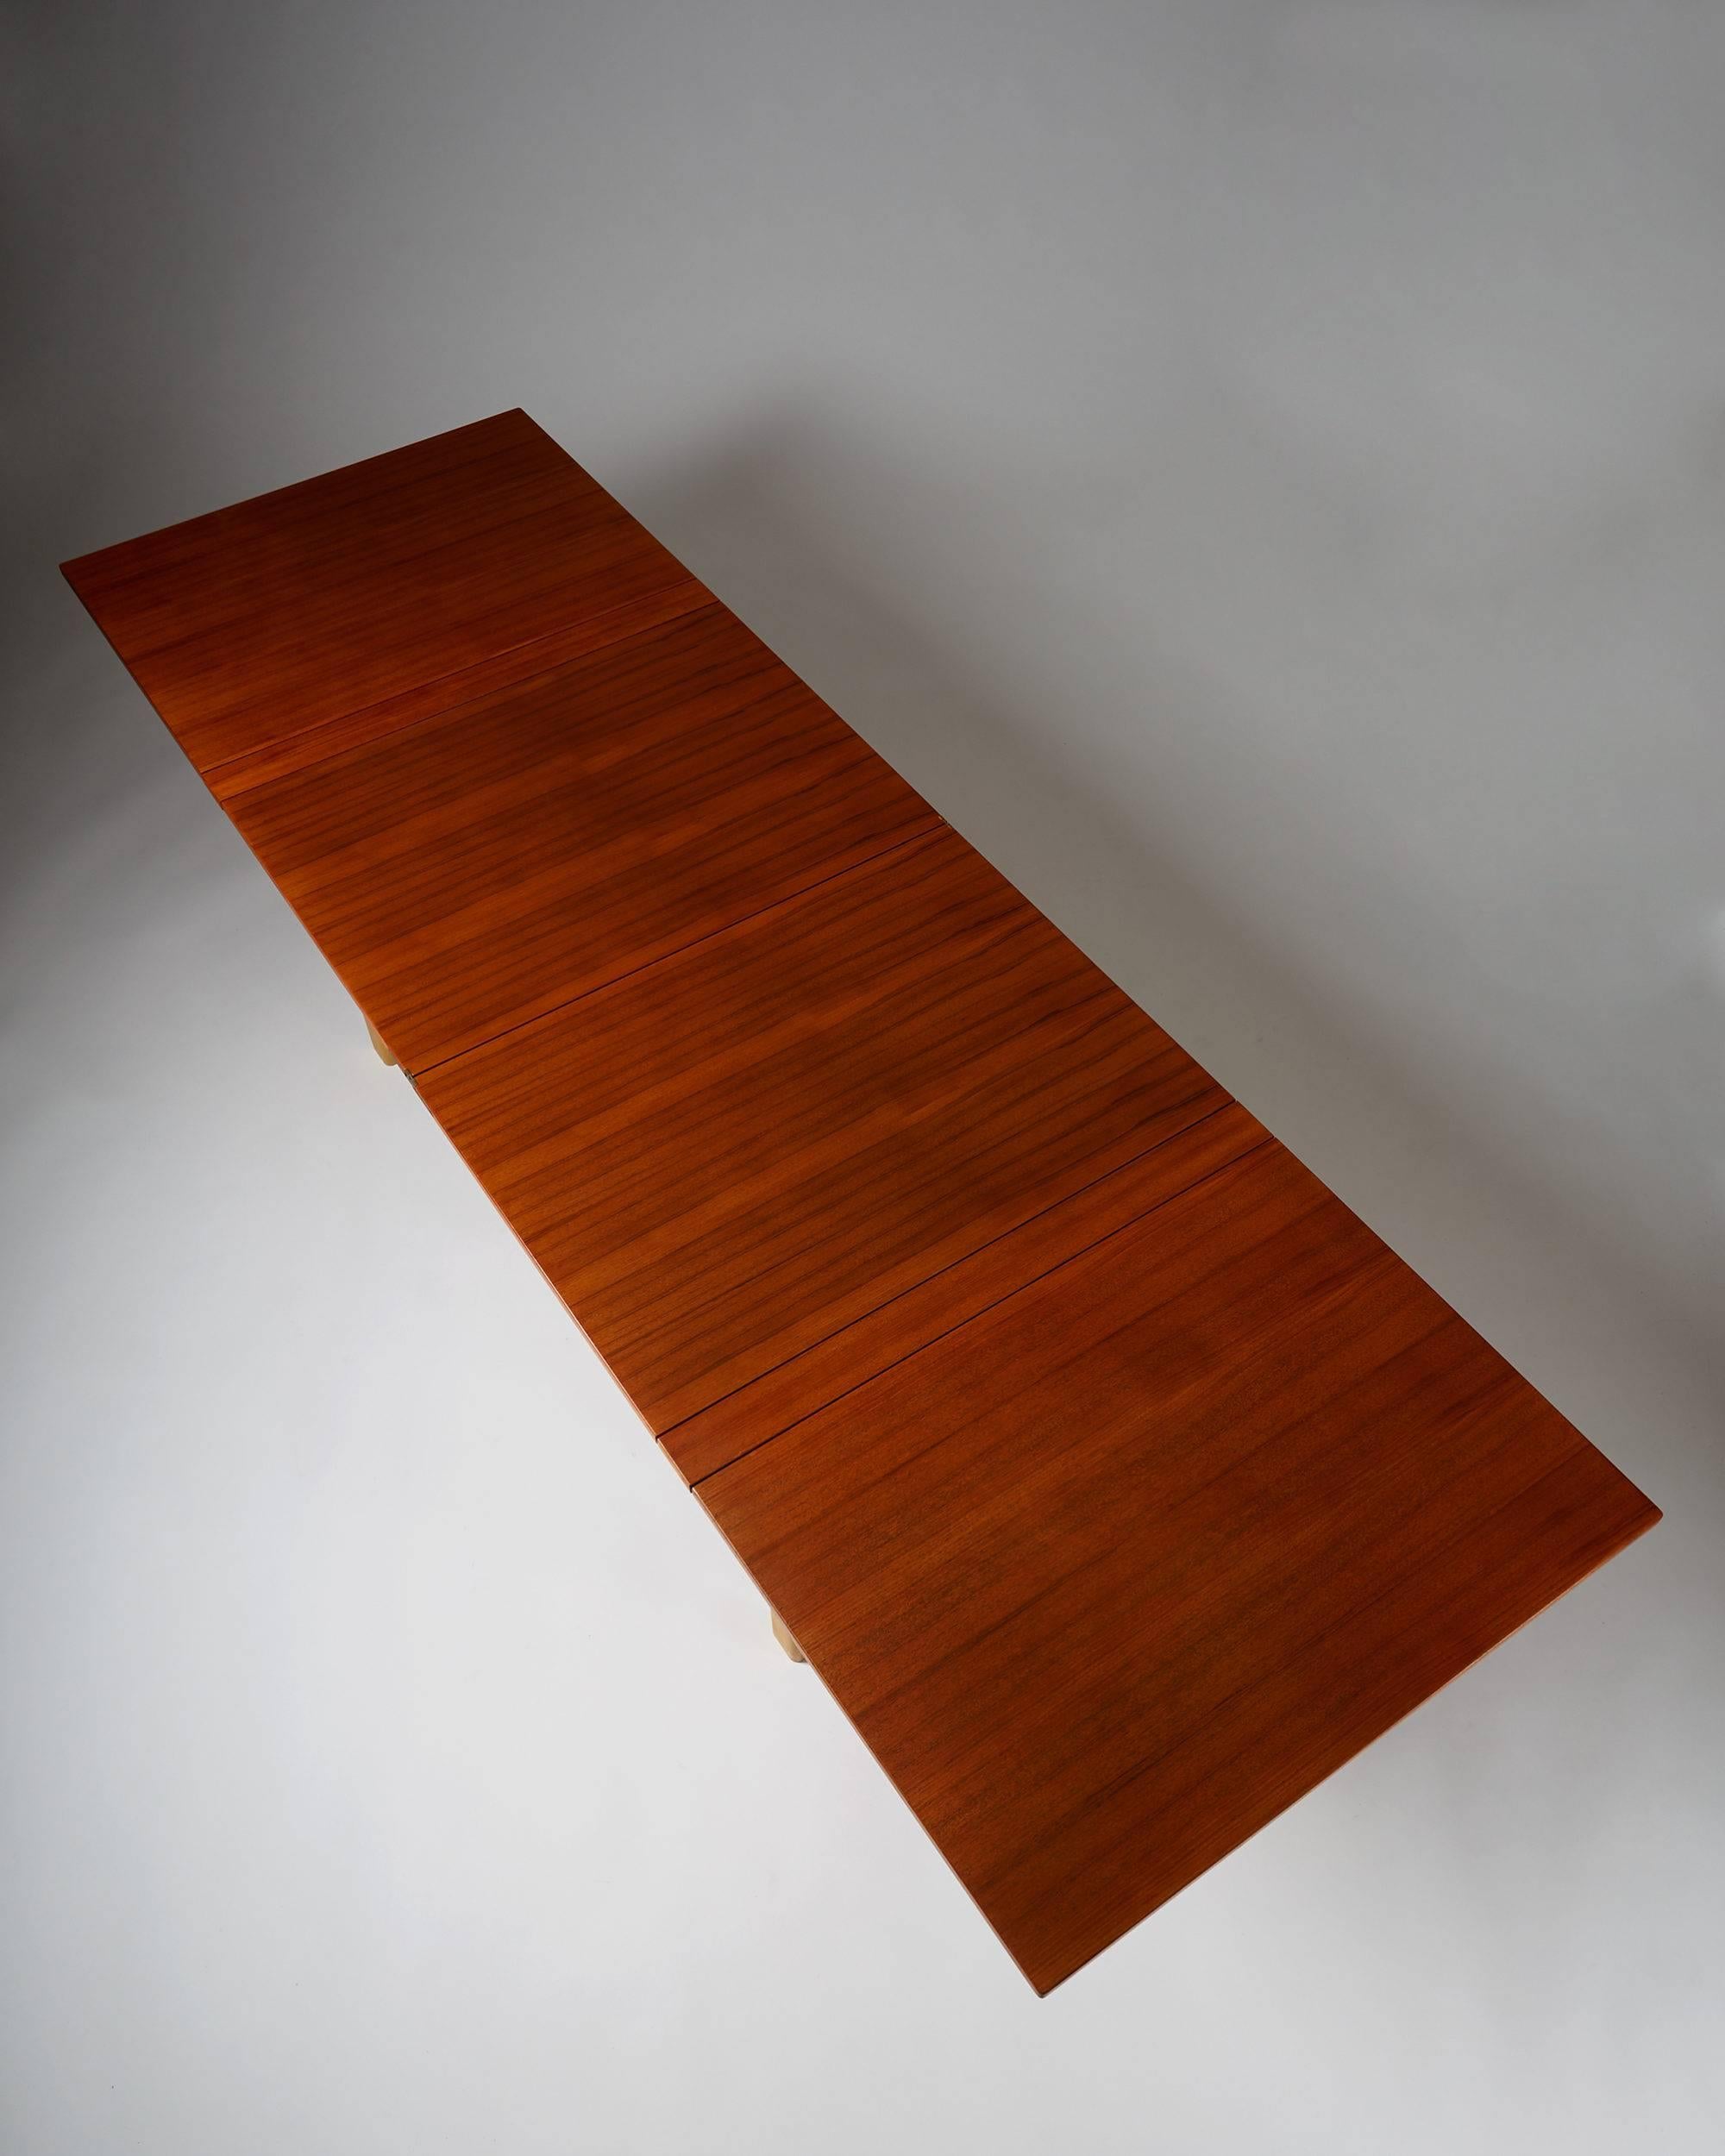 Swedish Dining Table “Maria Flap” Designed by Bruno Mathsson, Sweden, 1965